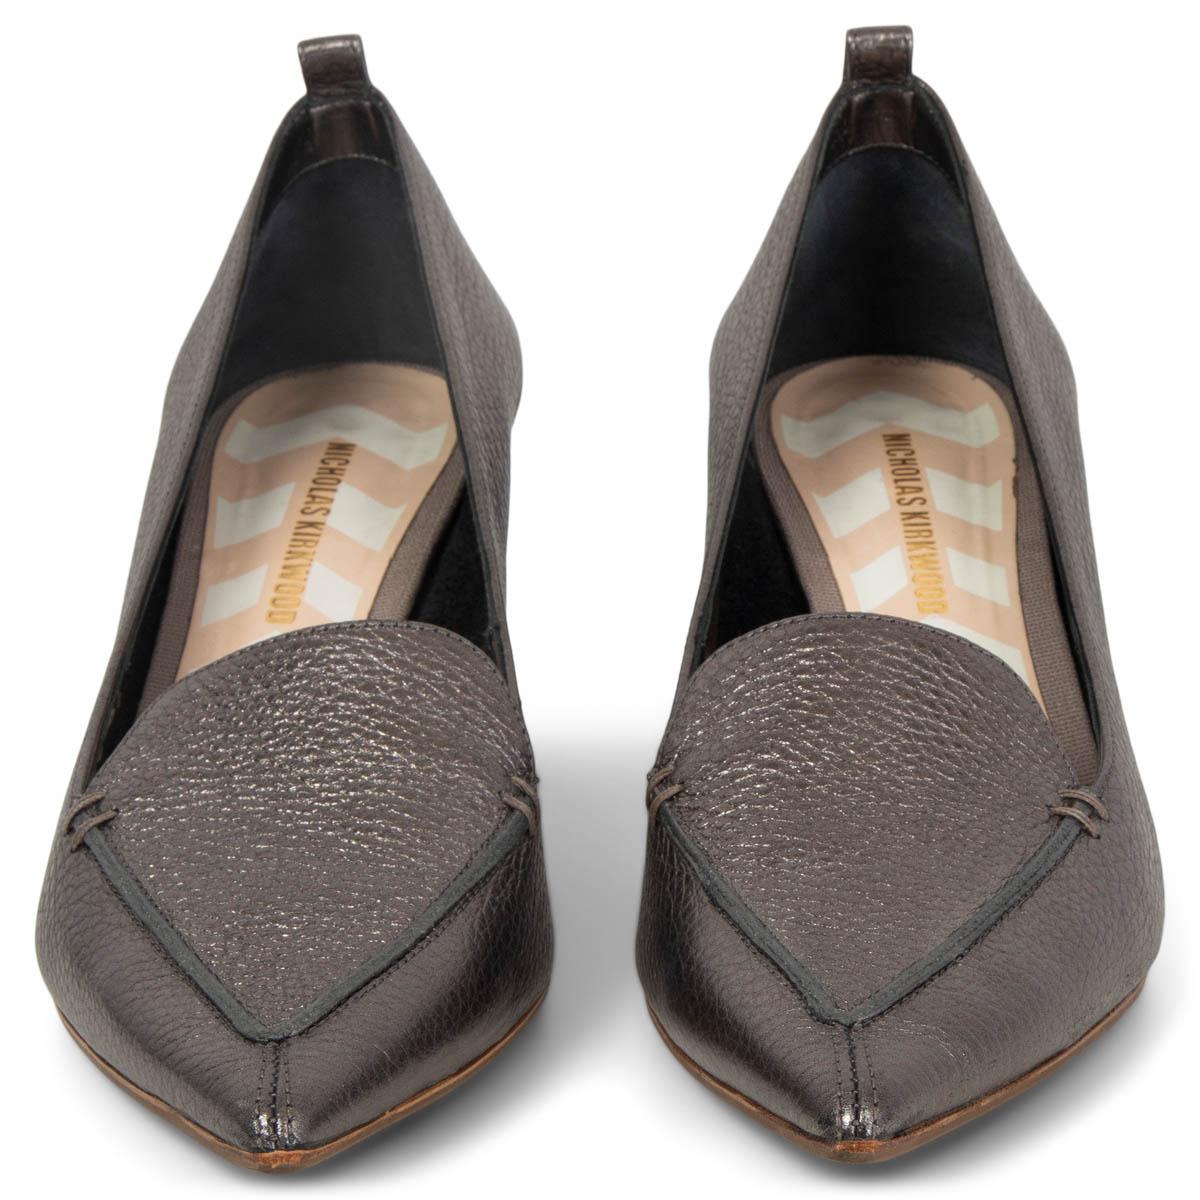 100% authentic Nicholas Kirkwood Beya block heel pumps in grey metallic grained leather with a pointed-toe. Have been worn and are in excellent condition. Come with dust bag. Rubber sole got added. 

Measurements
Imprinted Size	42
Shoe